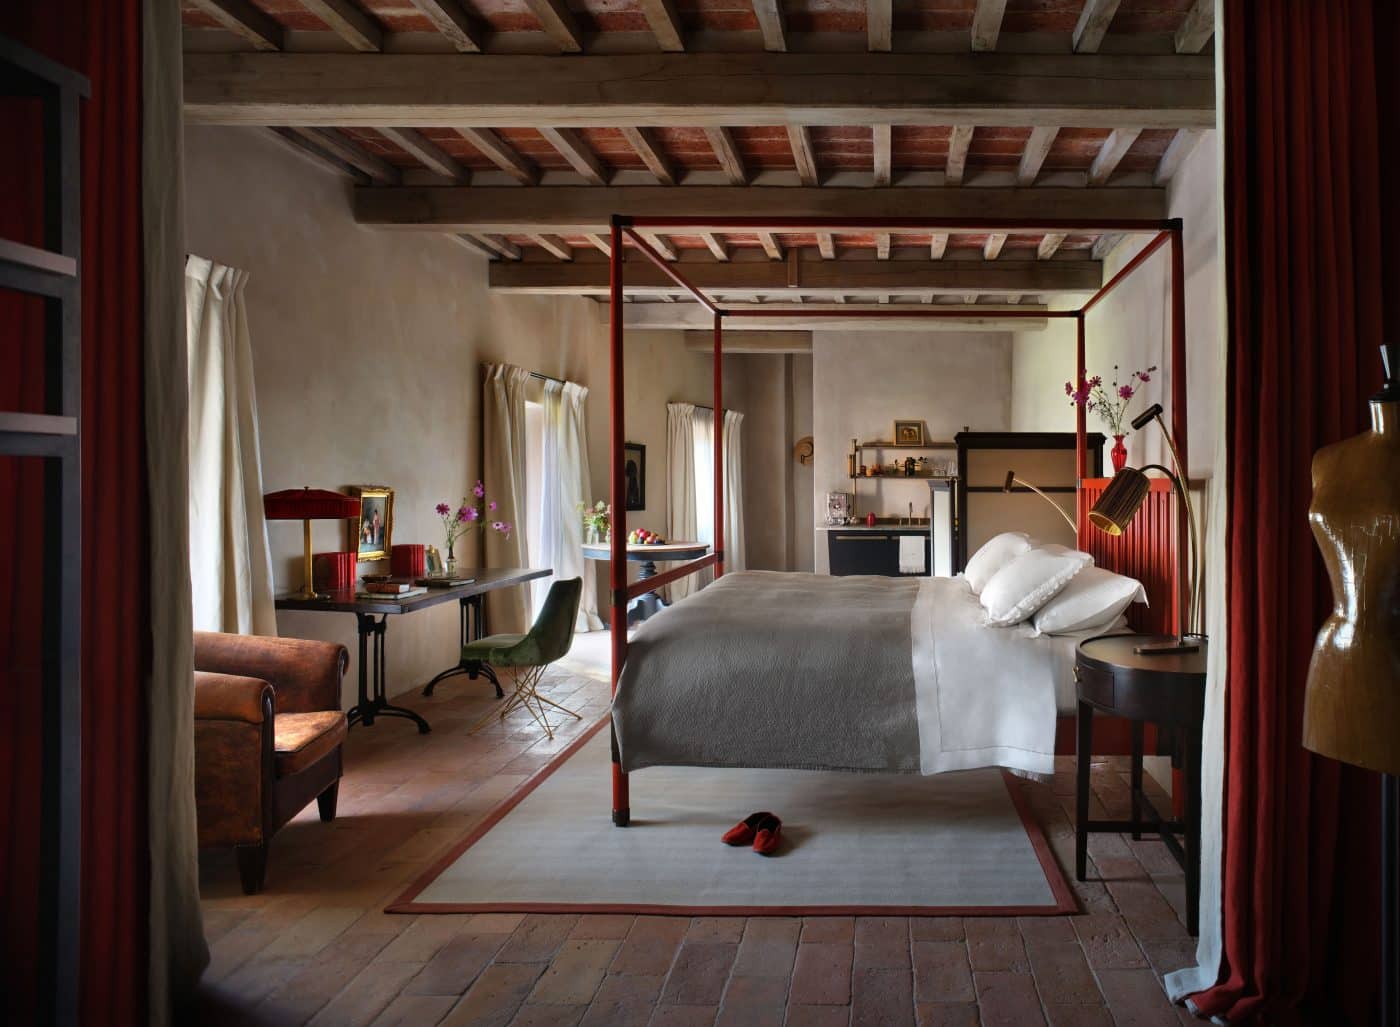 view of a suite at the Castello di Reschio hotel with B.B for Reschio campaign bed